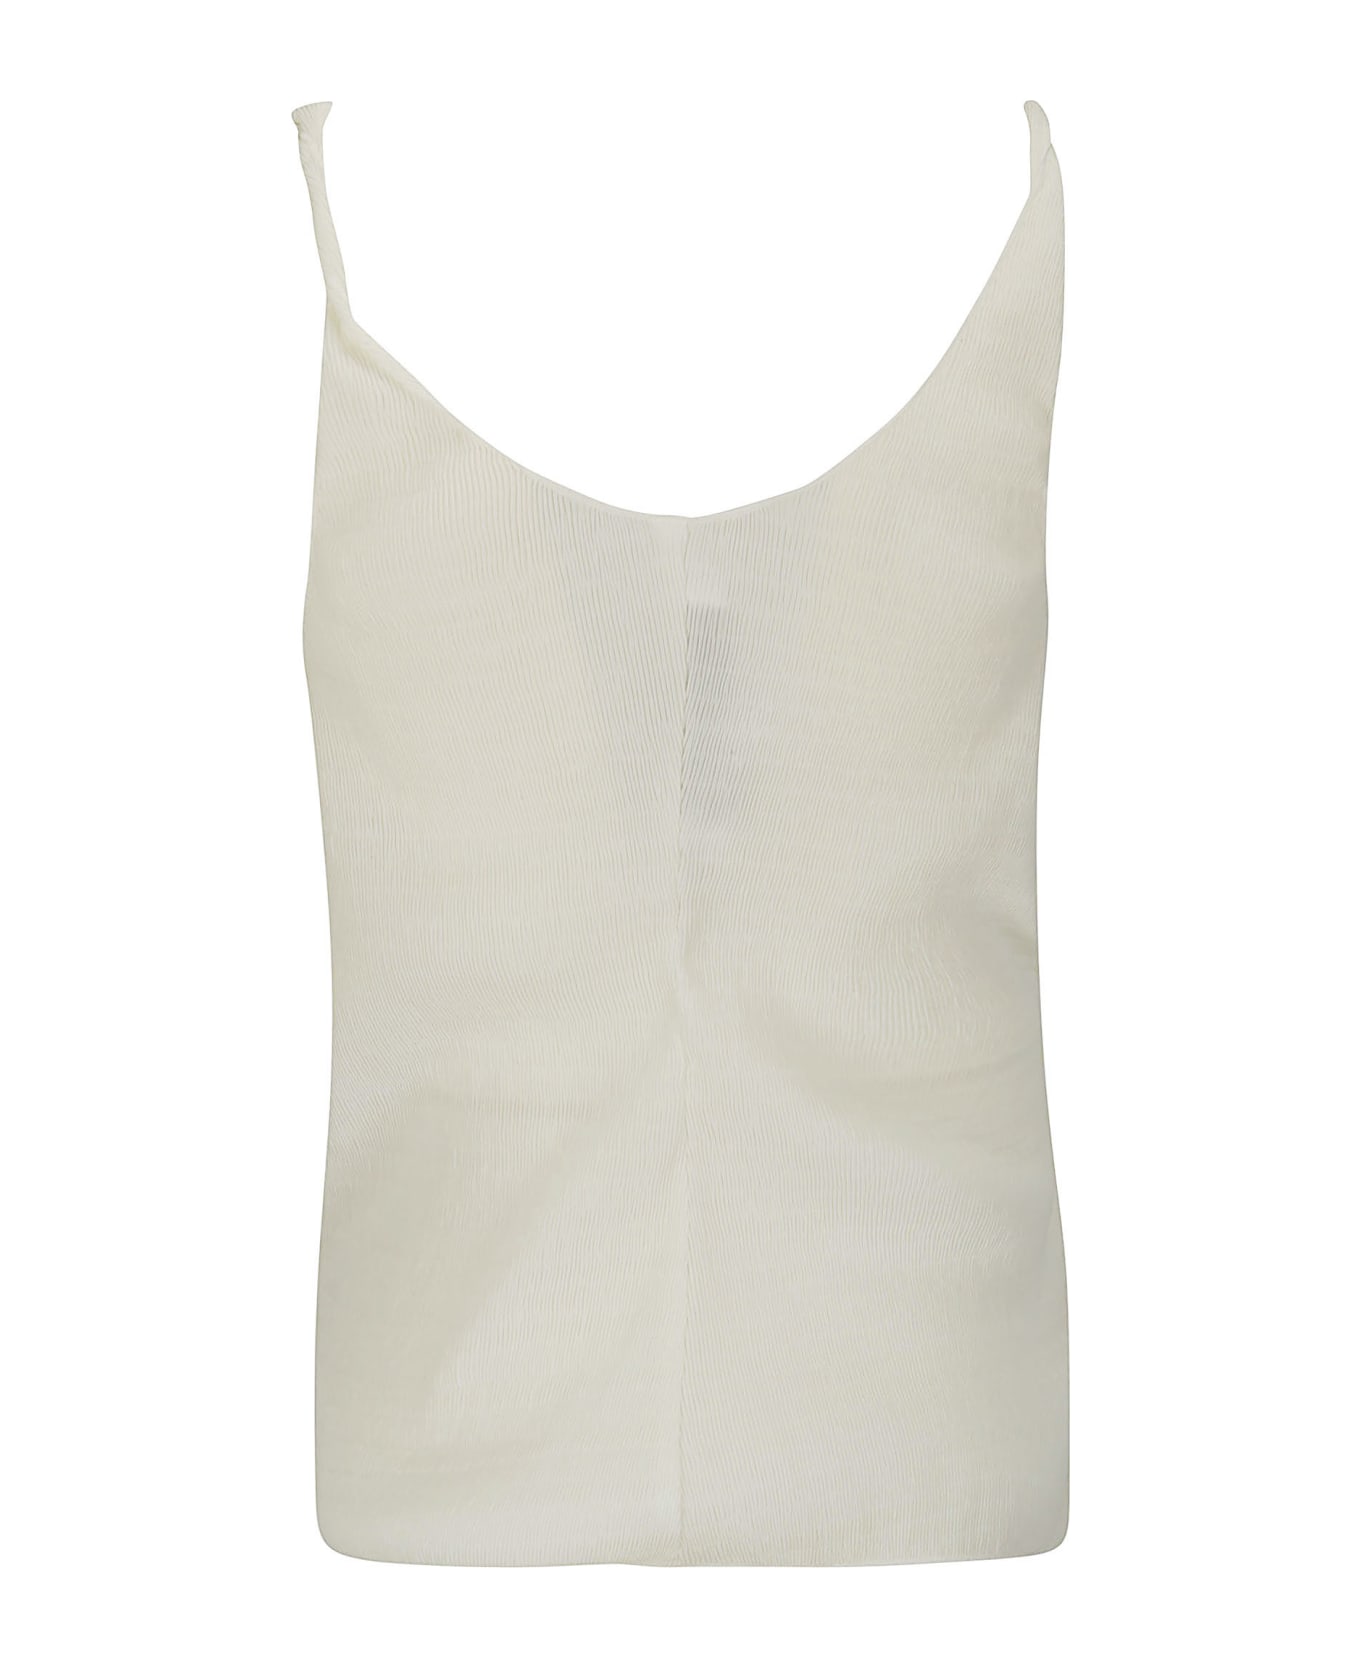 J.W. Anderson Knot Front Strap Top - OFF WHITE  トップス